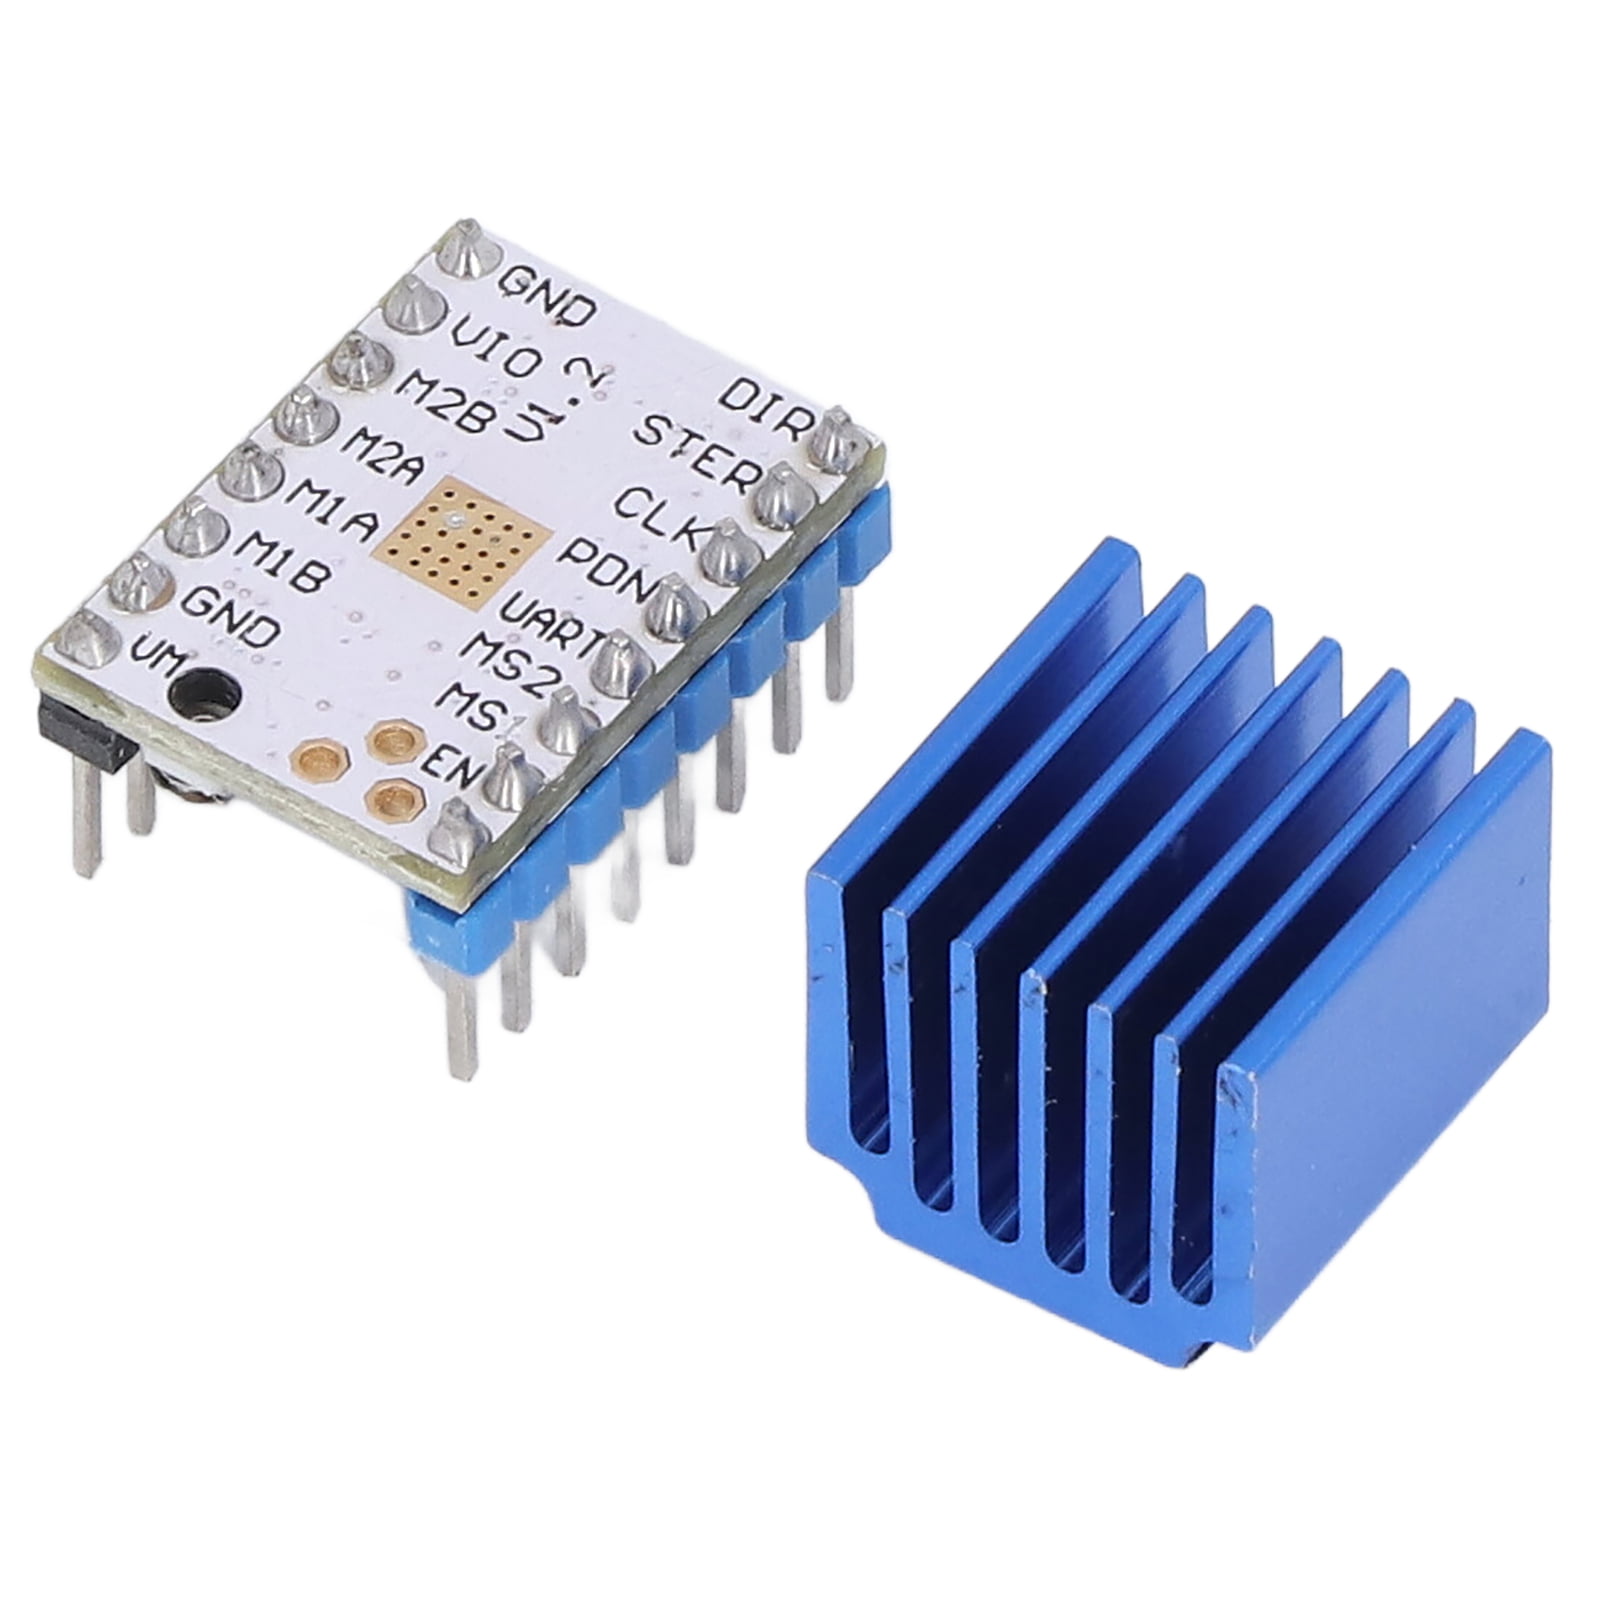 1pc Stepper Motor Driver For FDM 3D Printer mother board Packed with Heat Sink Screwdriver Yellow Eryone Stepper Motor Driver TMC2208